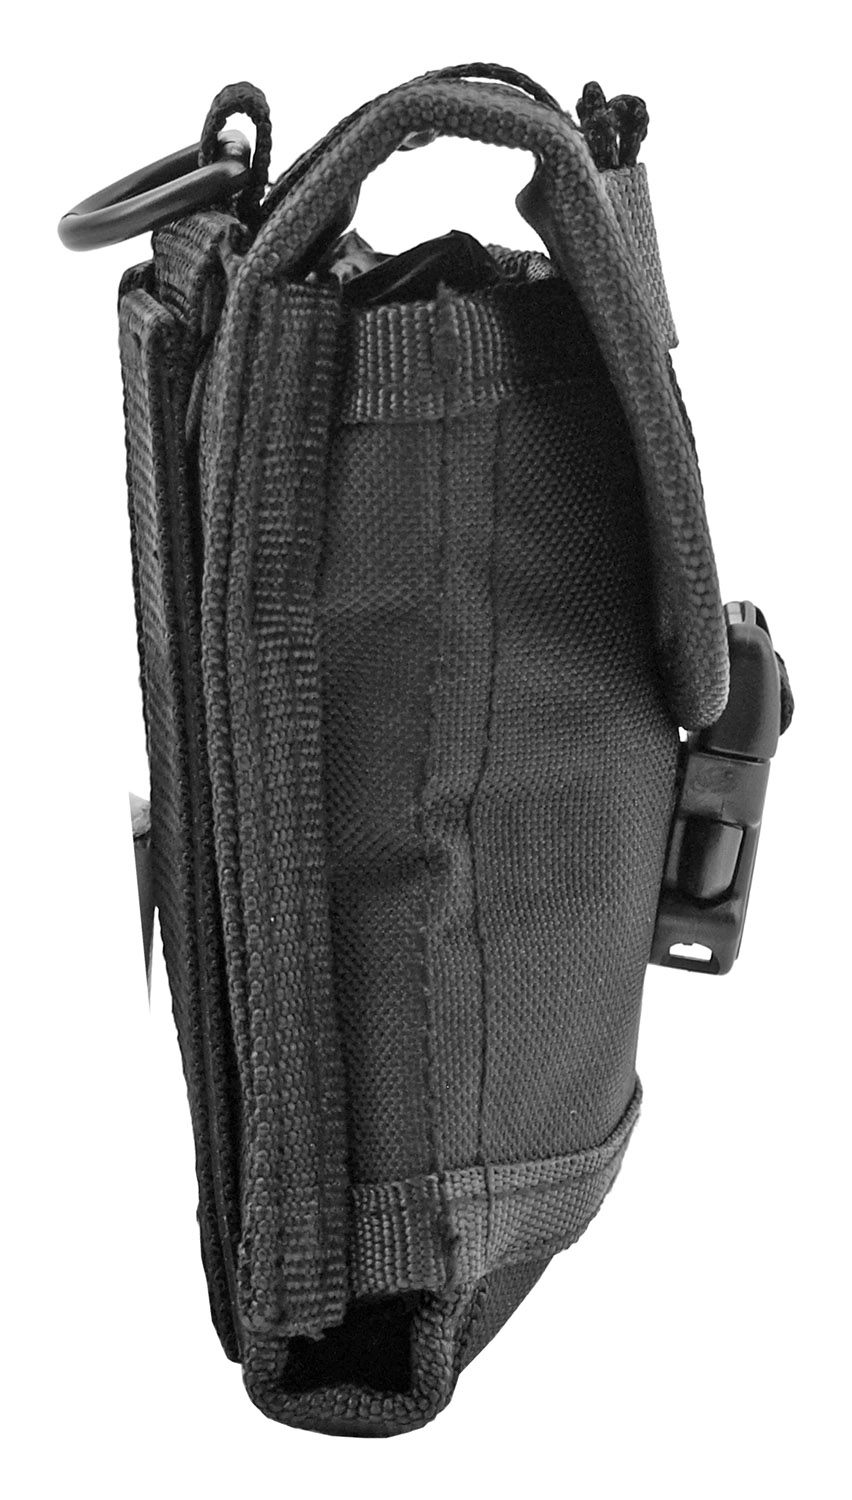 Space Force Tactical MOLLE Cell Phone Tech Pouch Carrier Vest ...